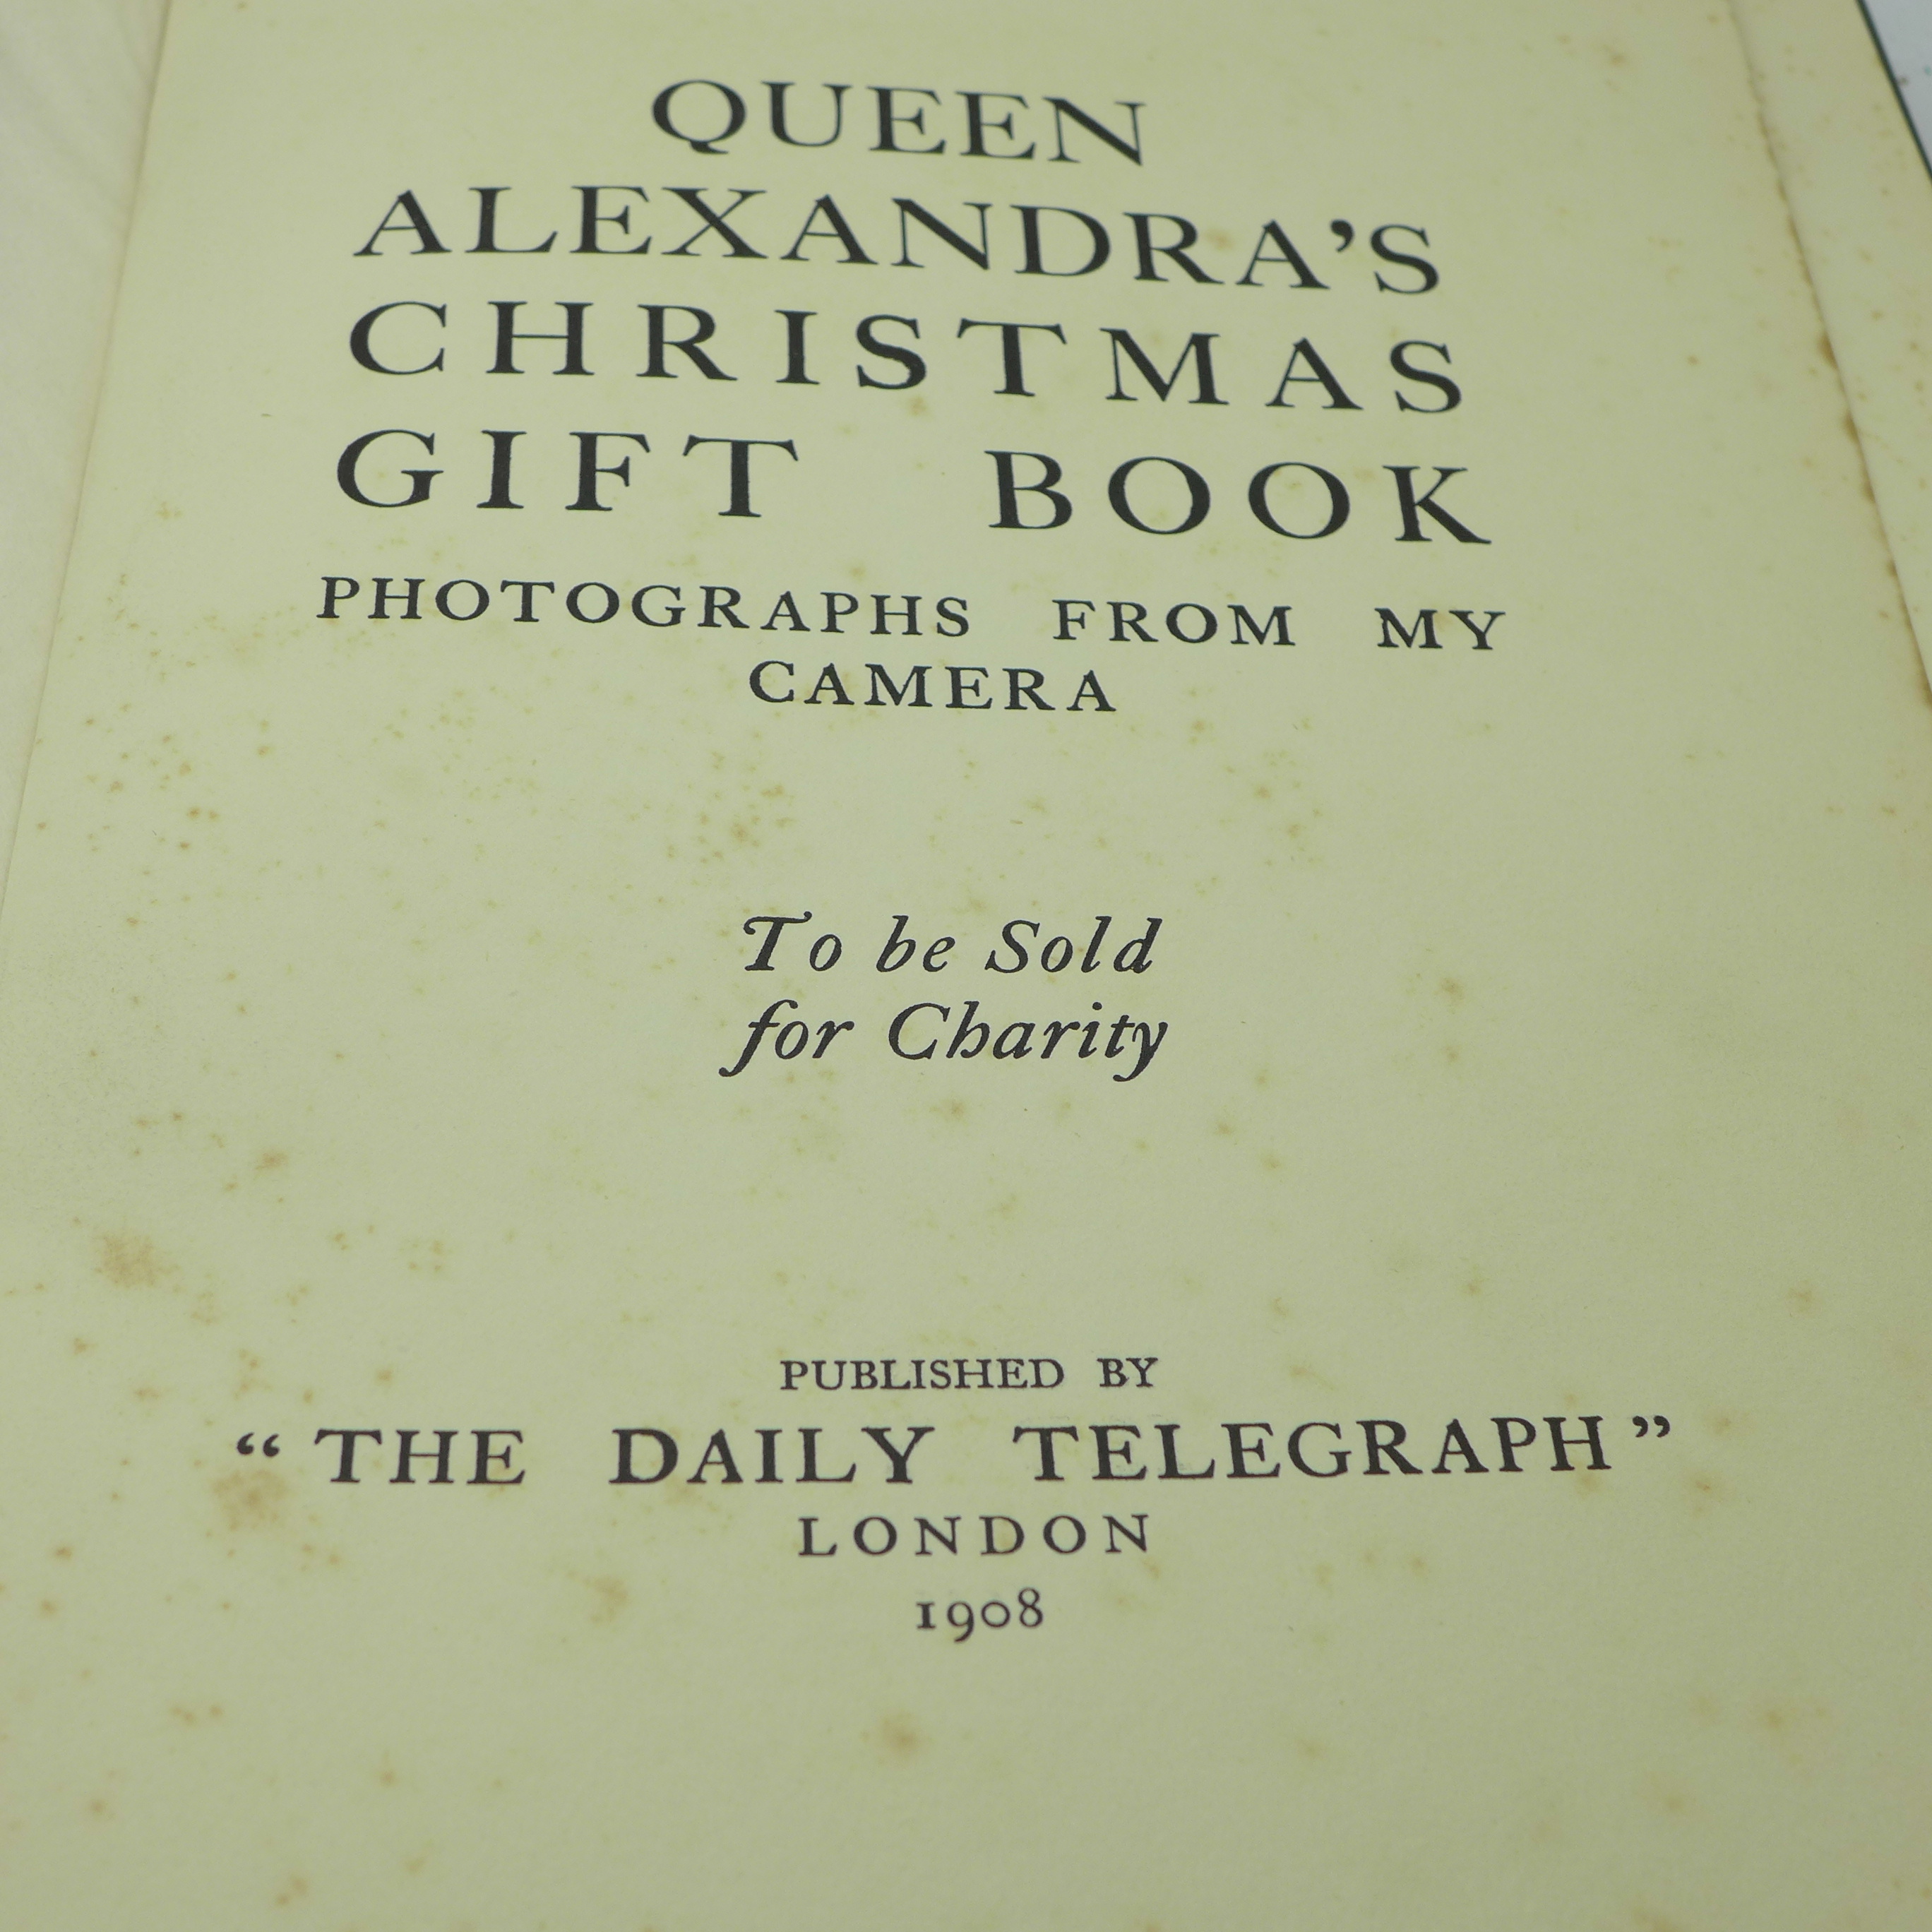 One volume, Queen Alexandra's Christmas Gift Book, photographs from my camera - Image 3 of 9